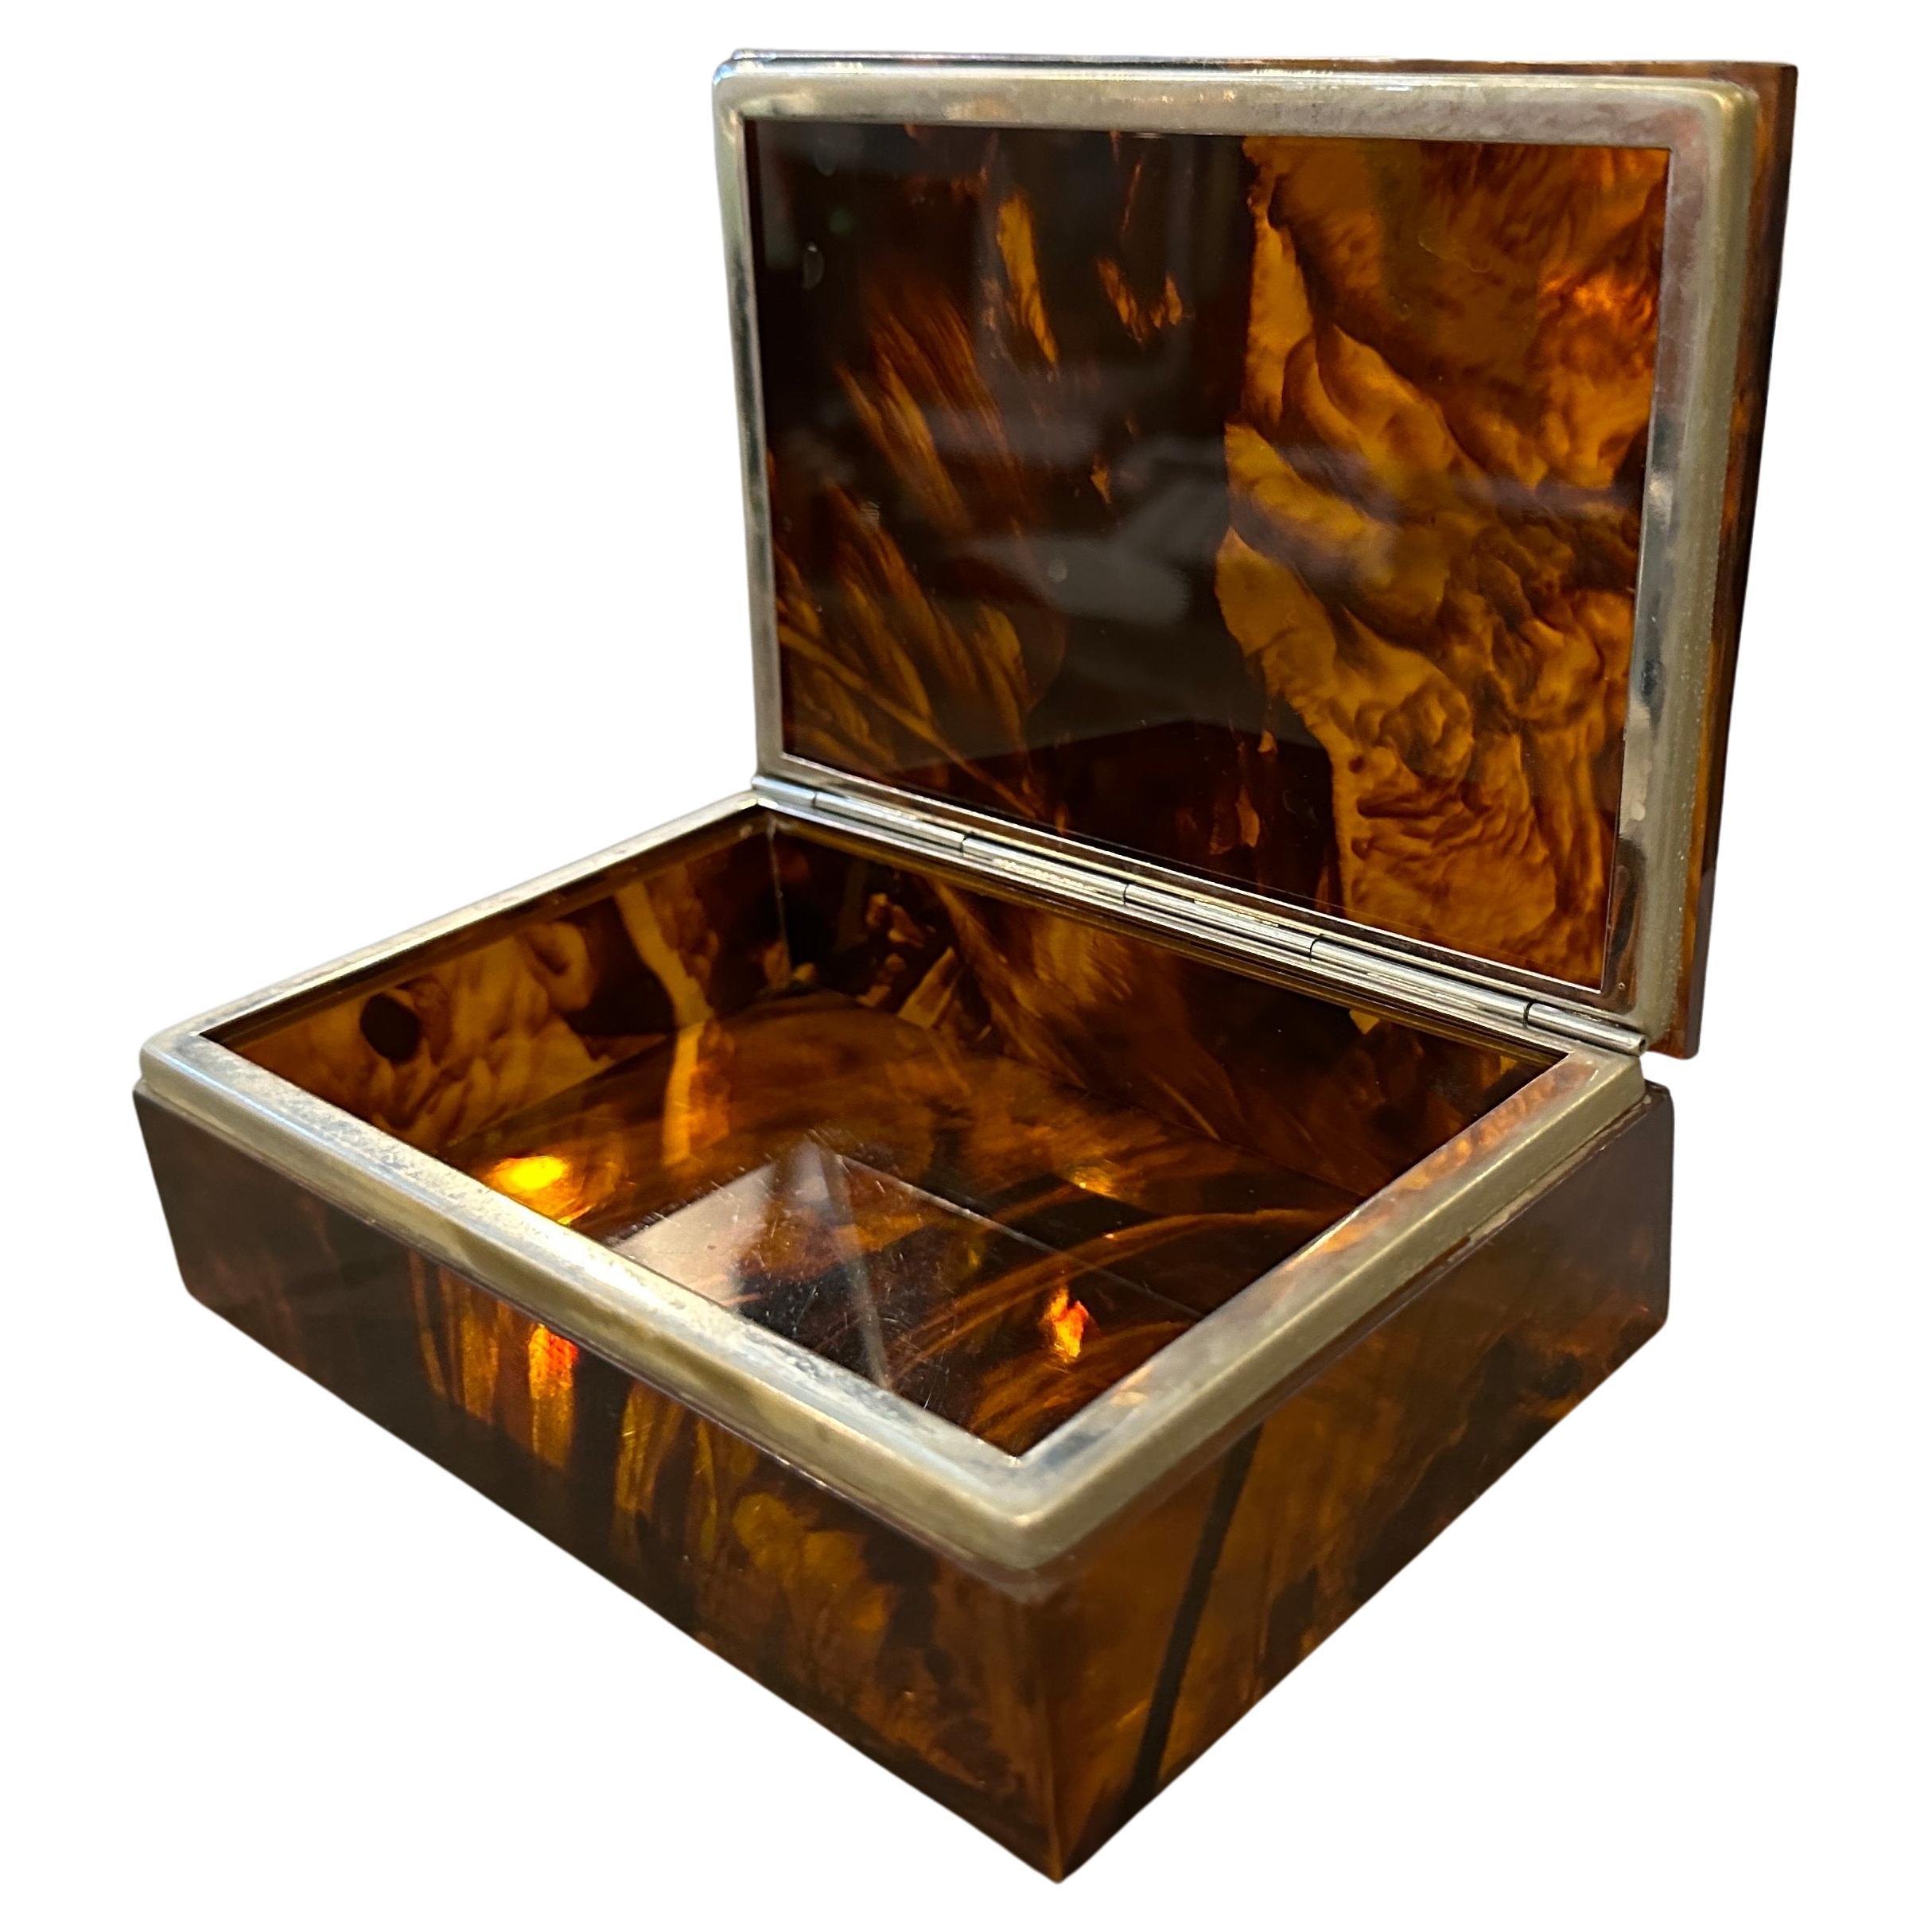 A lovely conditions rectangular jewelry box from the 1980s designed and manufactured in Italy that features a mid-century modern style with its fake tortoise lucite and chromed metal. The mid-century modern style was a popular design movement in the